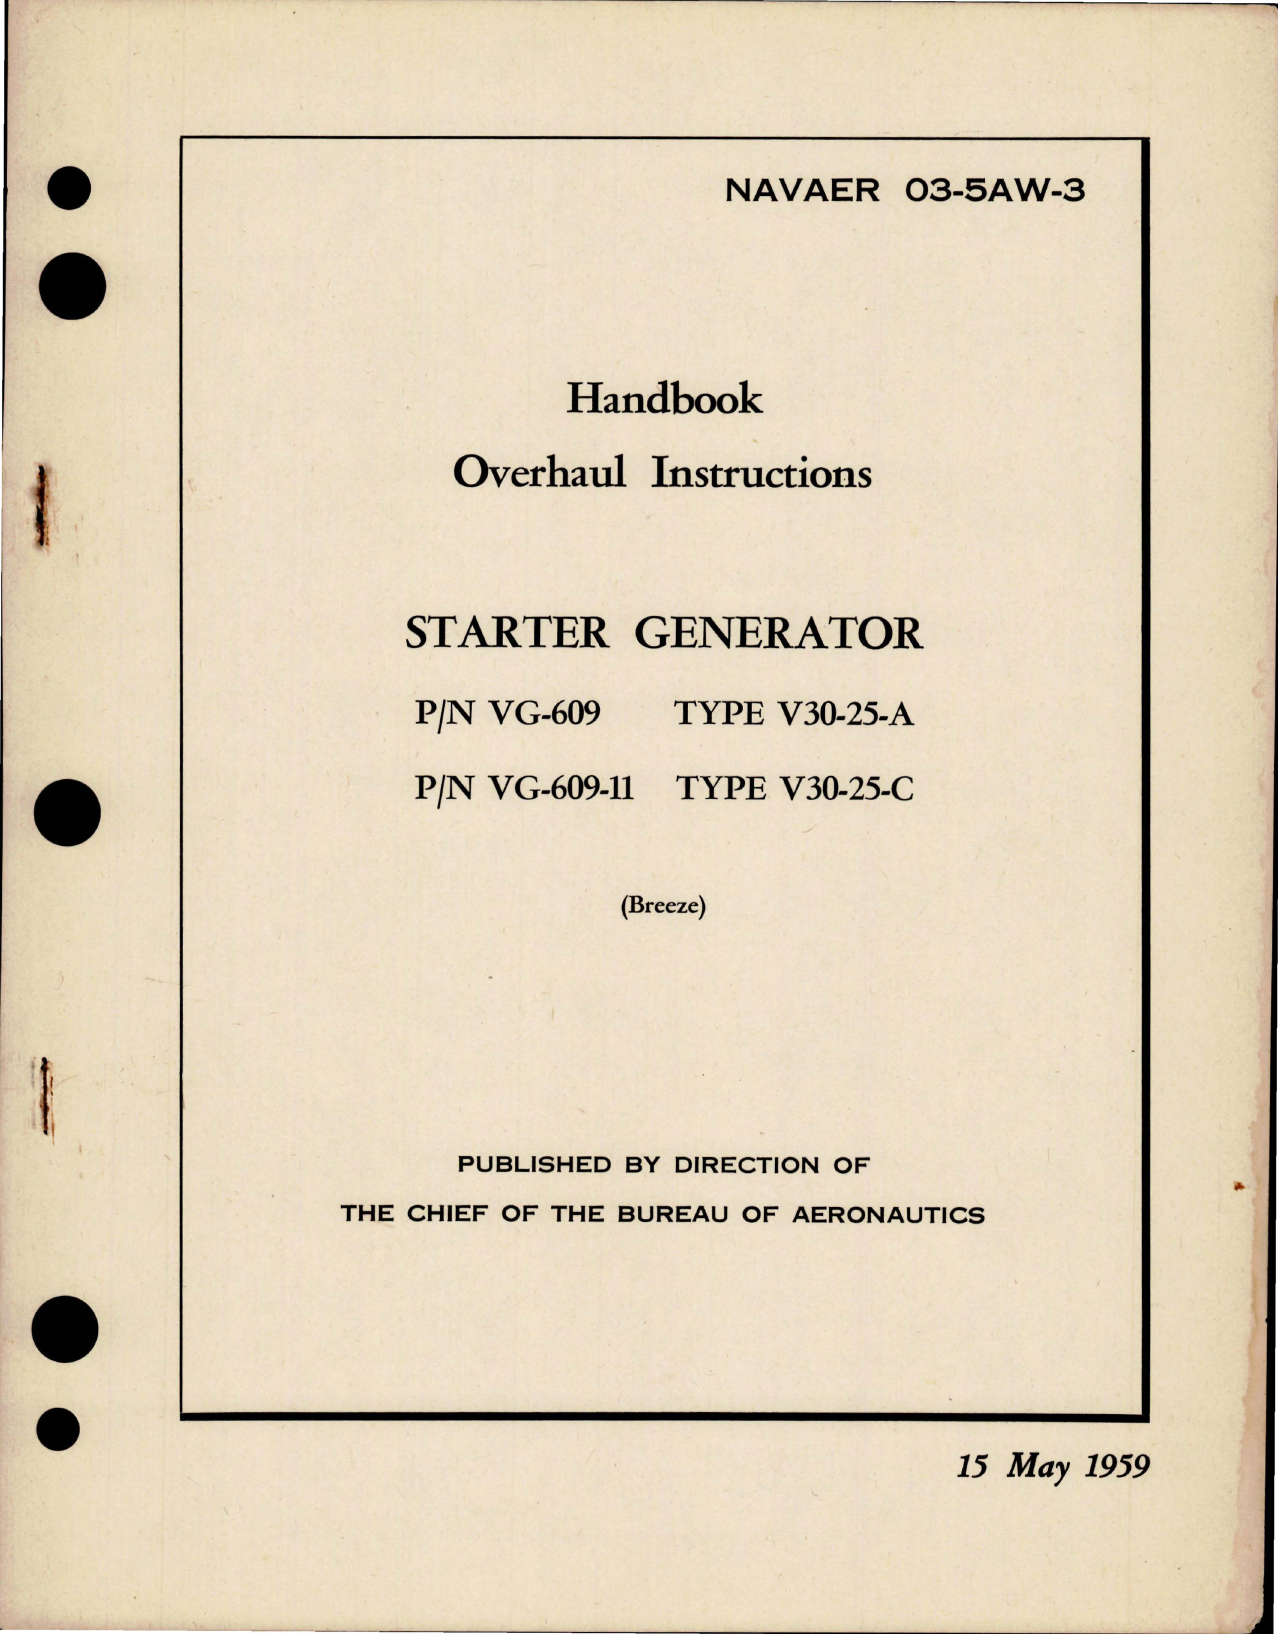 Sample page 1 from AirCorps Library document: Overhaul Instructions for Starter Generator - Part VG-609, VG-609-11 - Types V30-25-A and V30-25-C